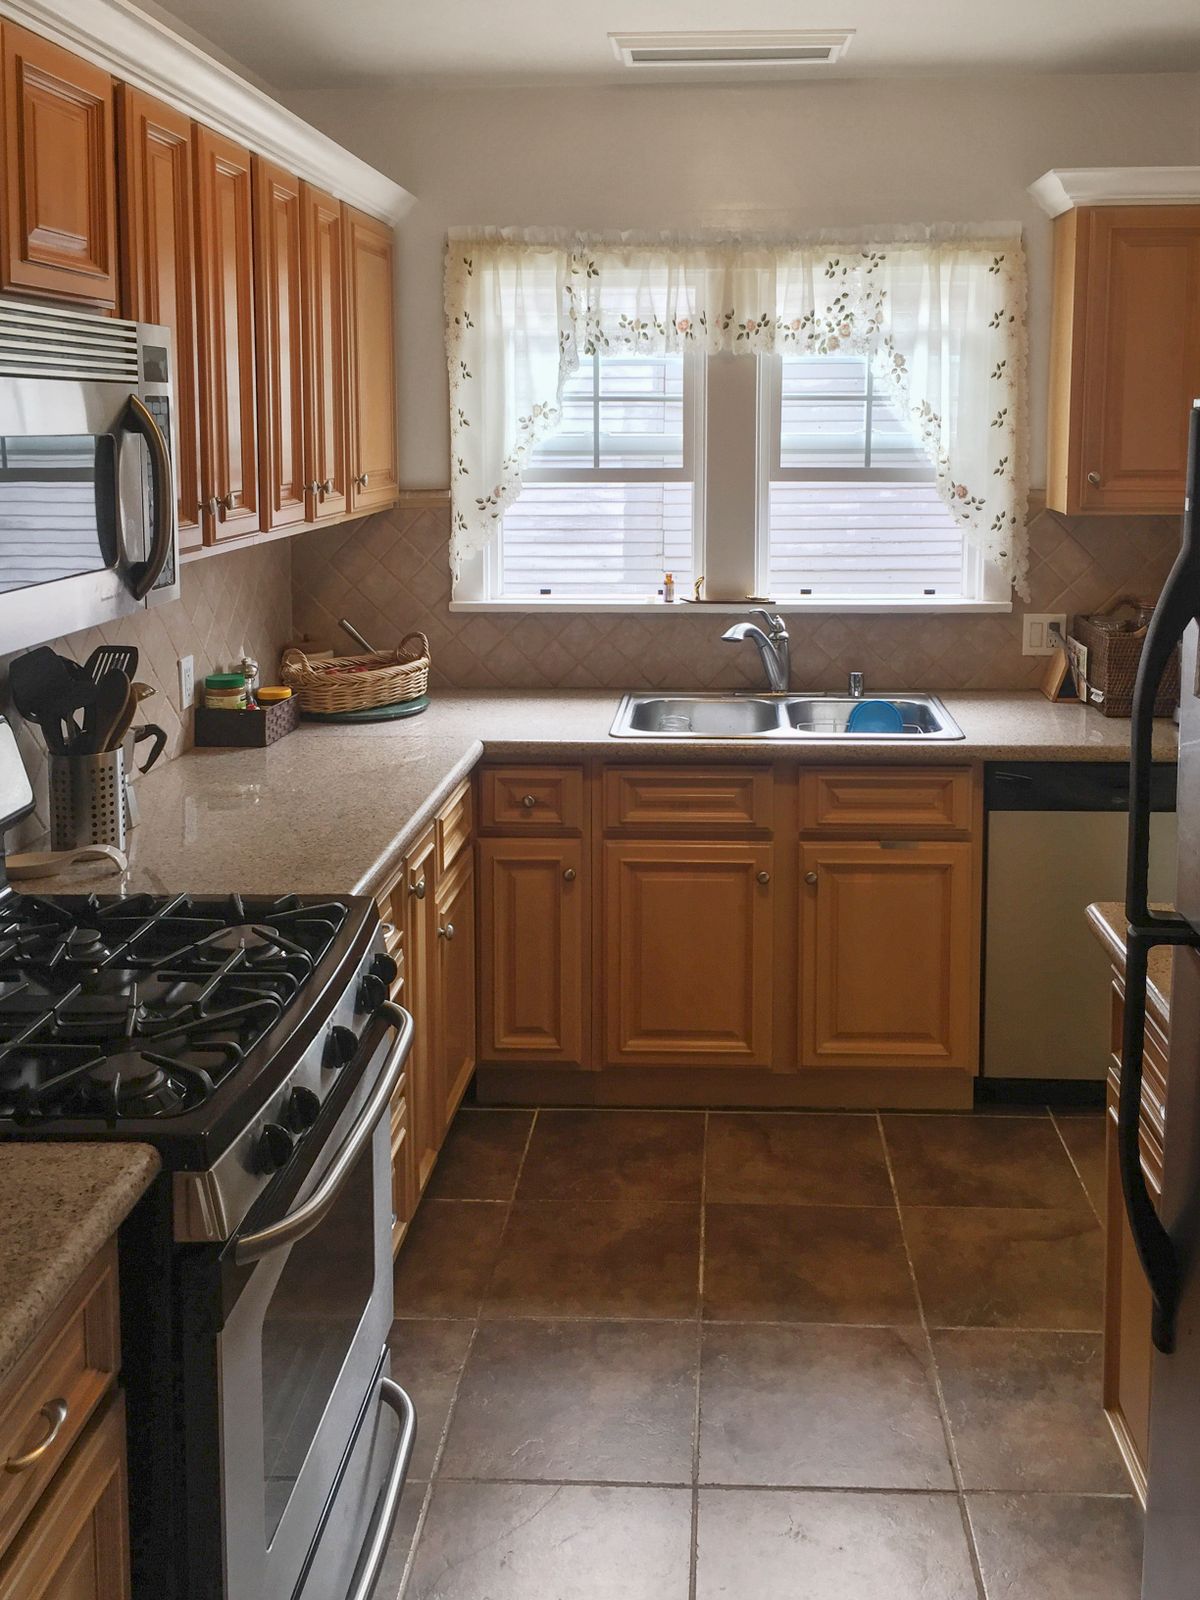 Interior view of Dryden Gardens senior living community featuring a well-designed kitchen with modern appliances.